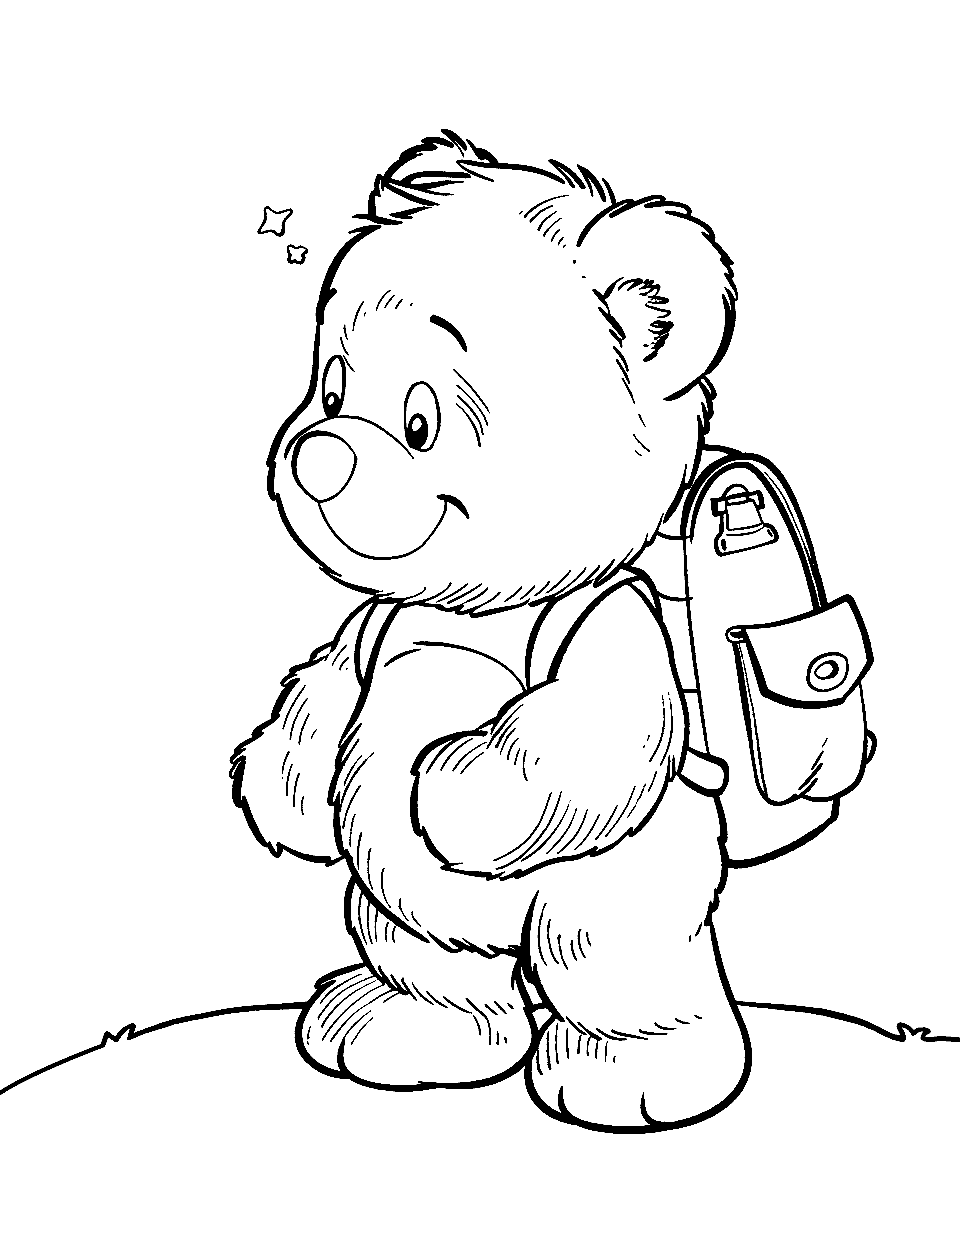 Boy Teddy Bear Adventure Coloring Page - A boy teddy bear with a backpack ready for an adventure.